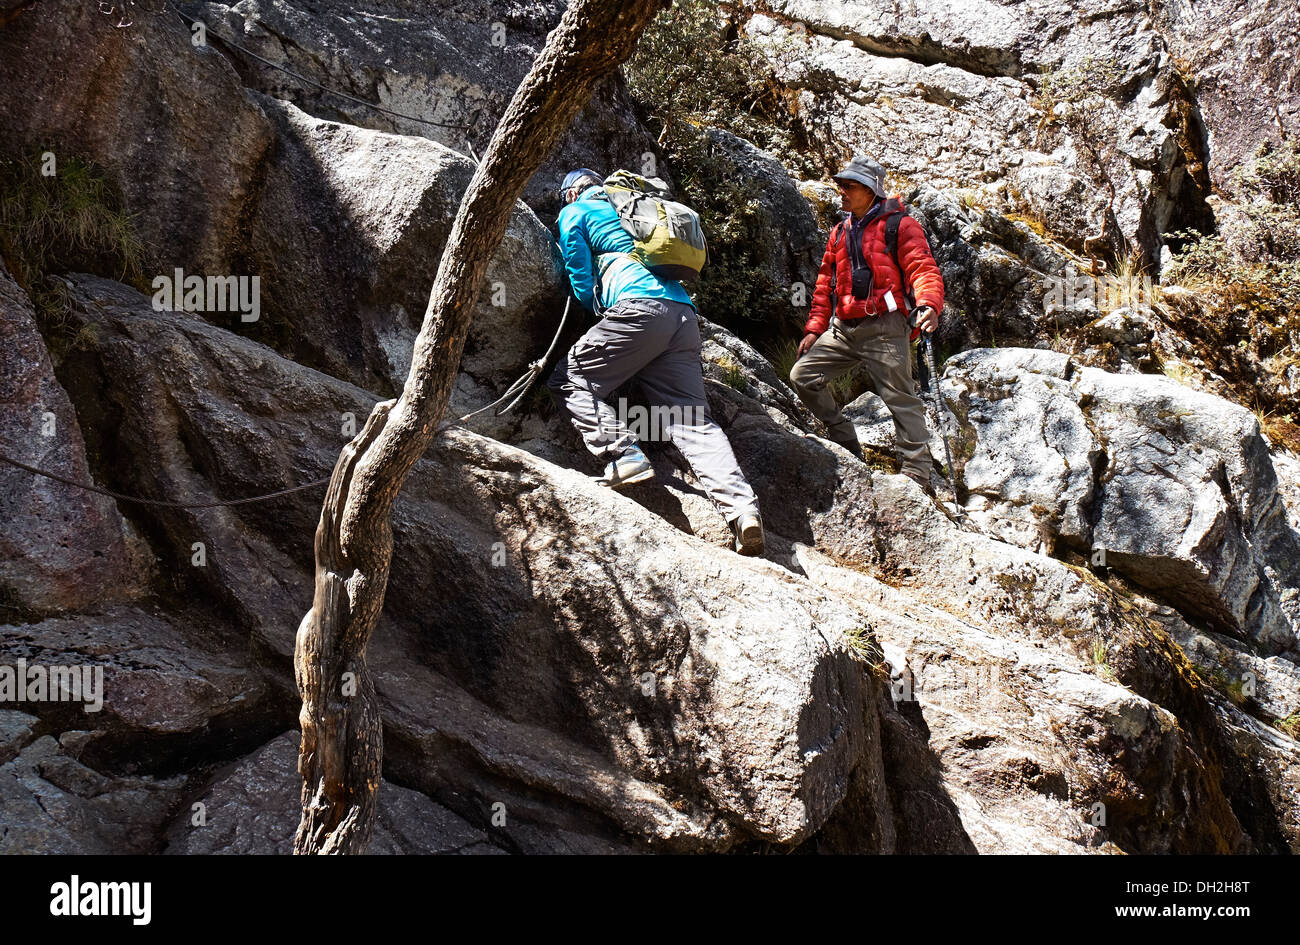 A climber and guide descending the Nev Churup trail, Huascaran National Park in the Andes. Stock Photo